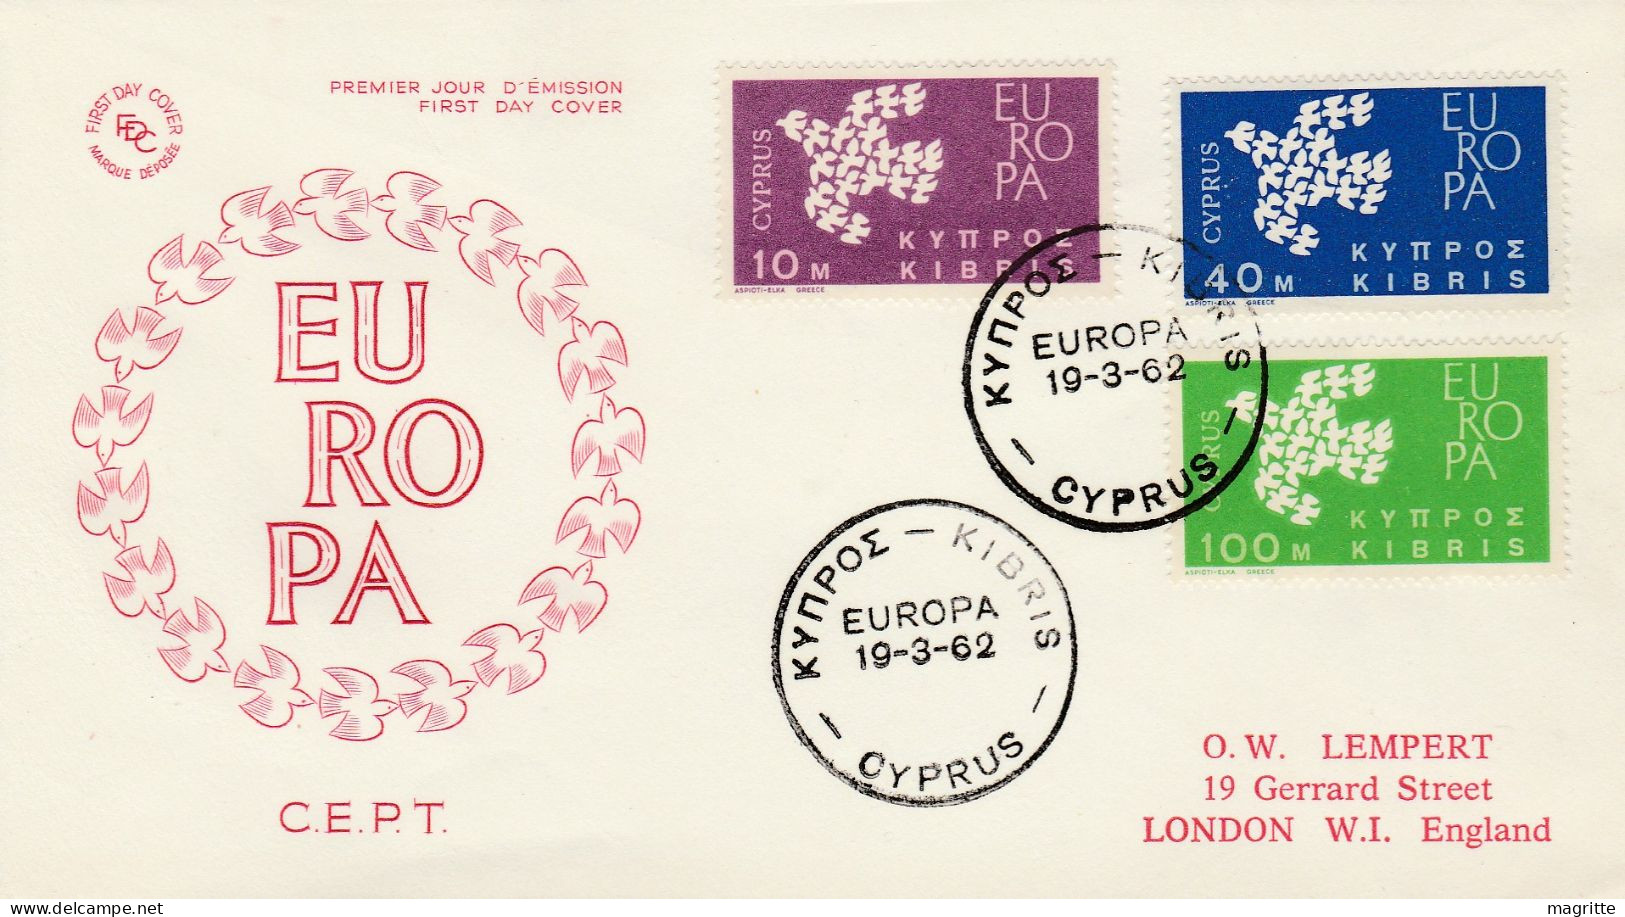 Chypre 1962 FDC Emission Commune Europa 1961 Cyprus FDC Joint Issue Europa 1961 - 1961